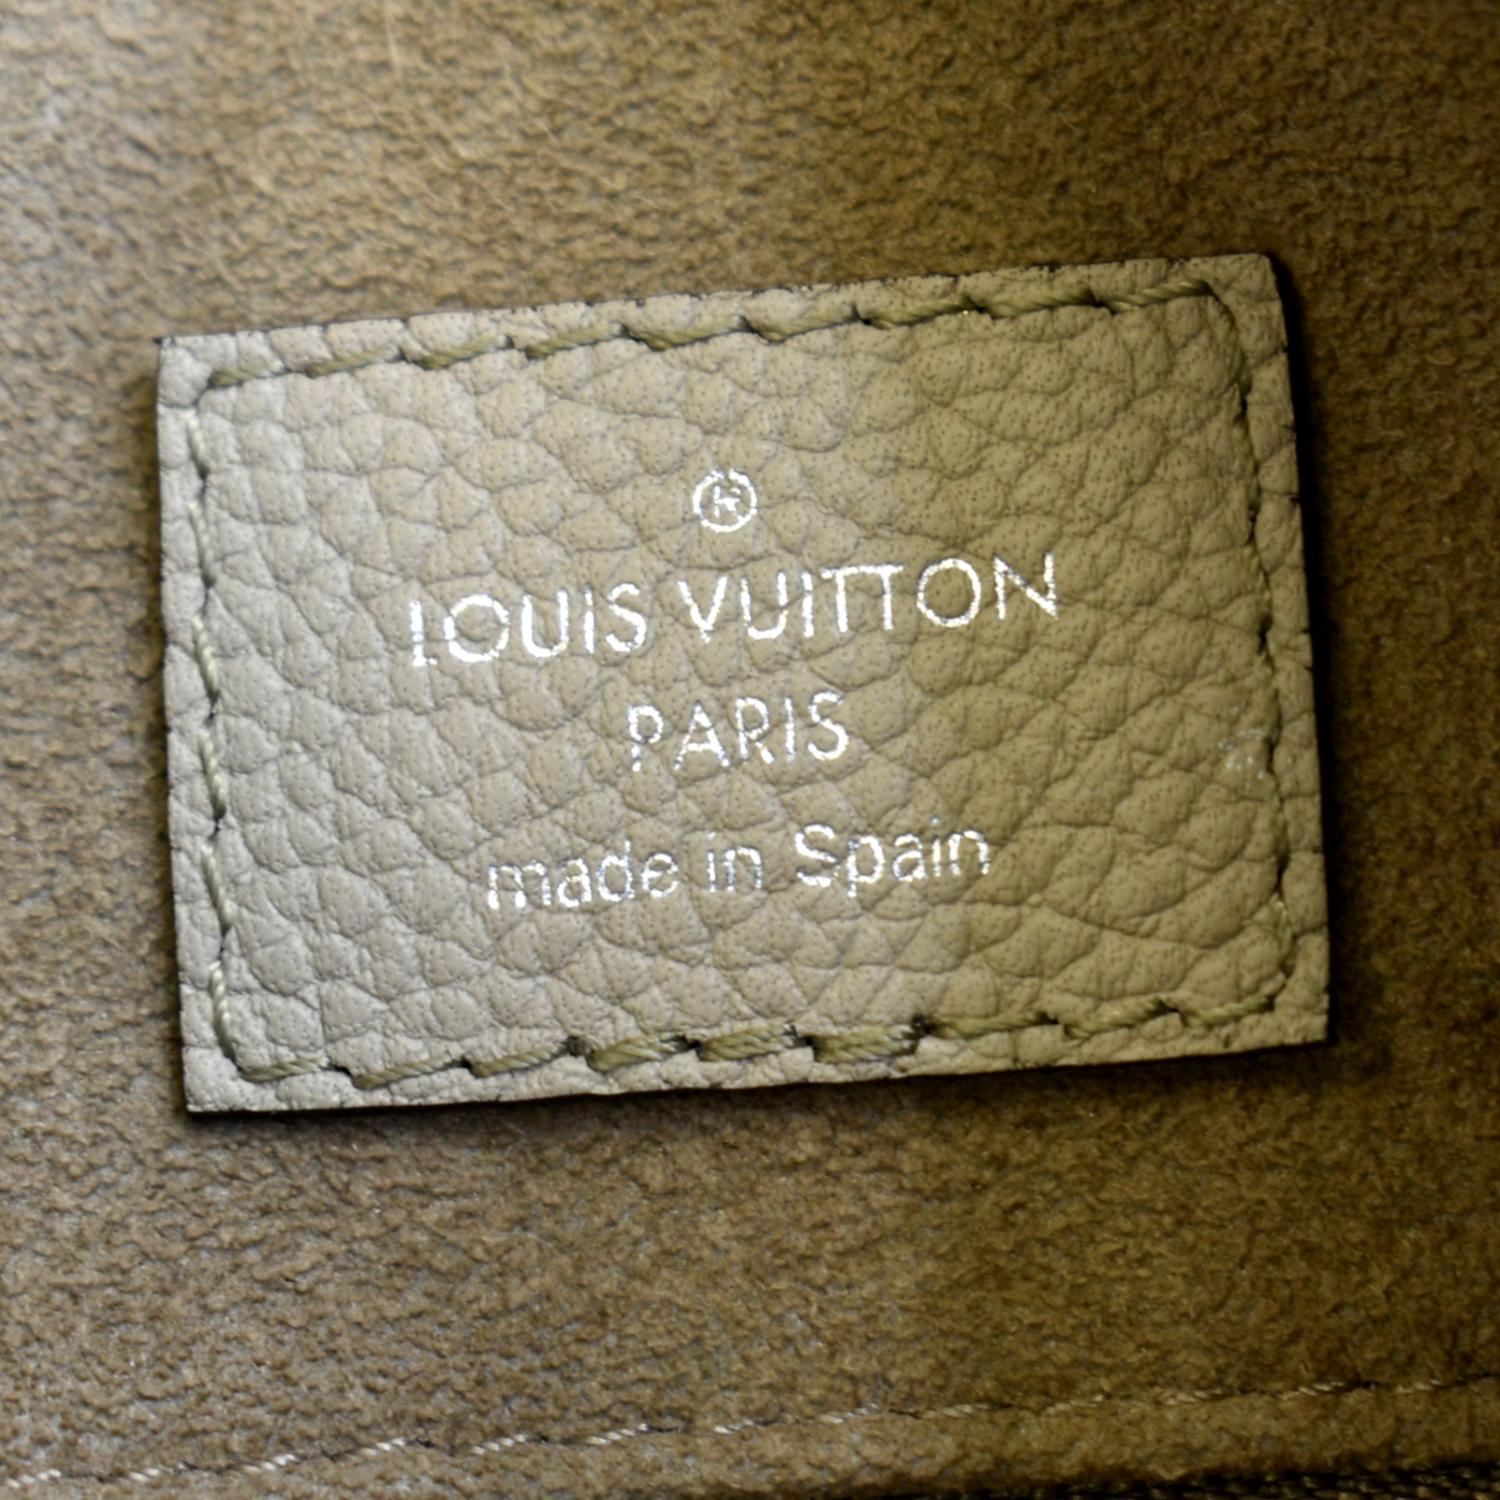 Louis Vuitton - Authenticated Beaubourg Hobo Handbag - Cloth Beige for Women, Very Good Condition